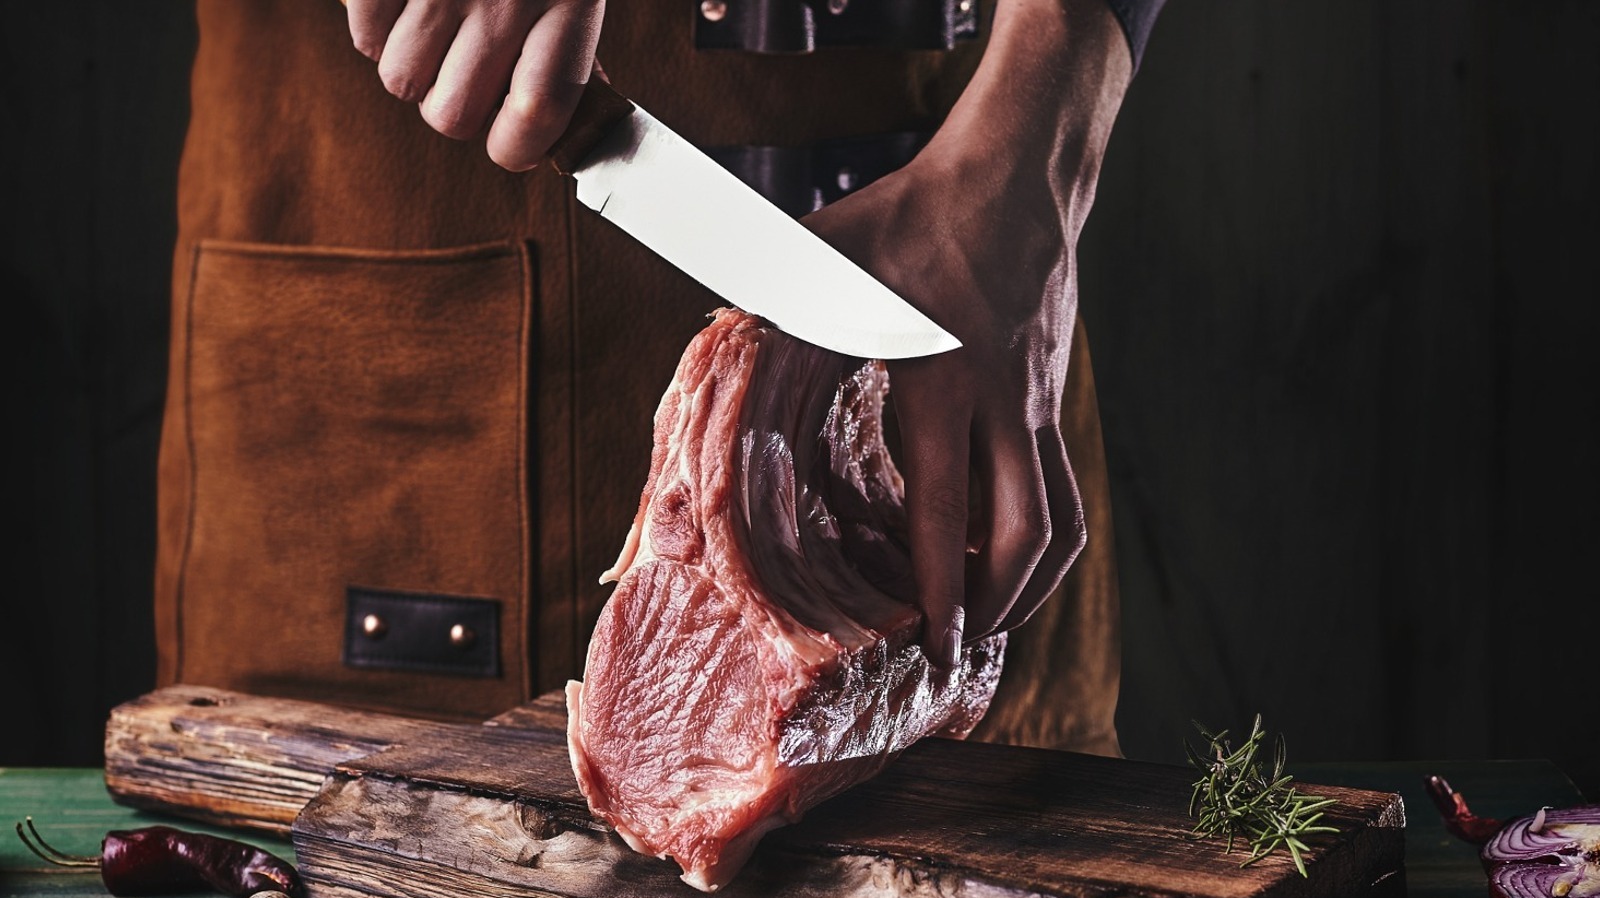 Slicing Through Bone With Chef's Knives Is Always A Mistake